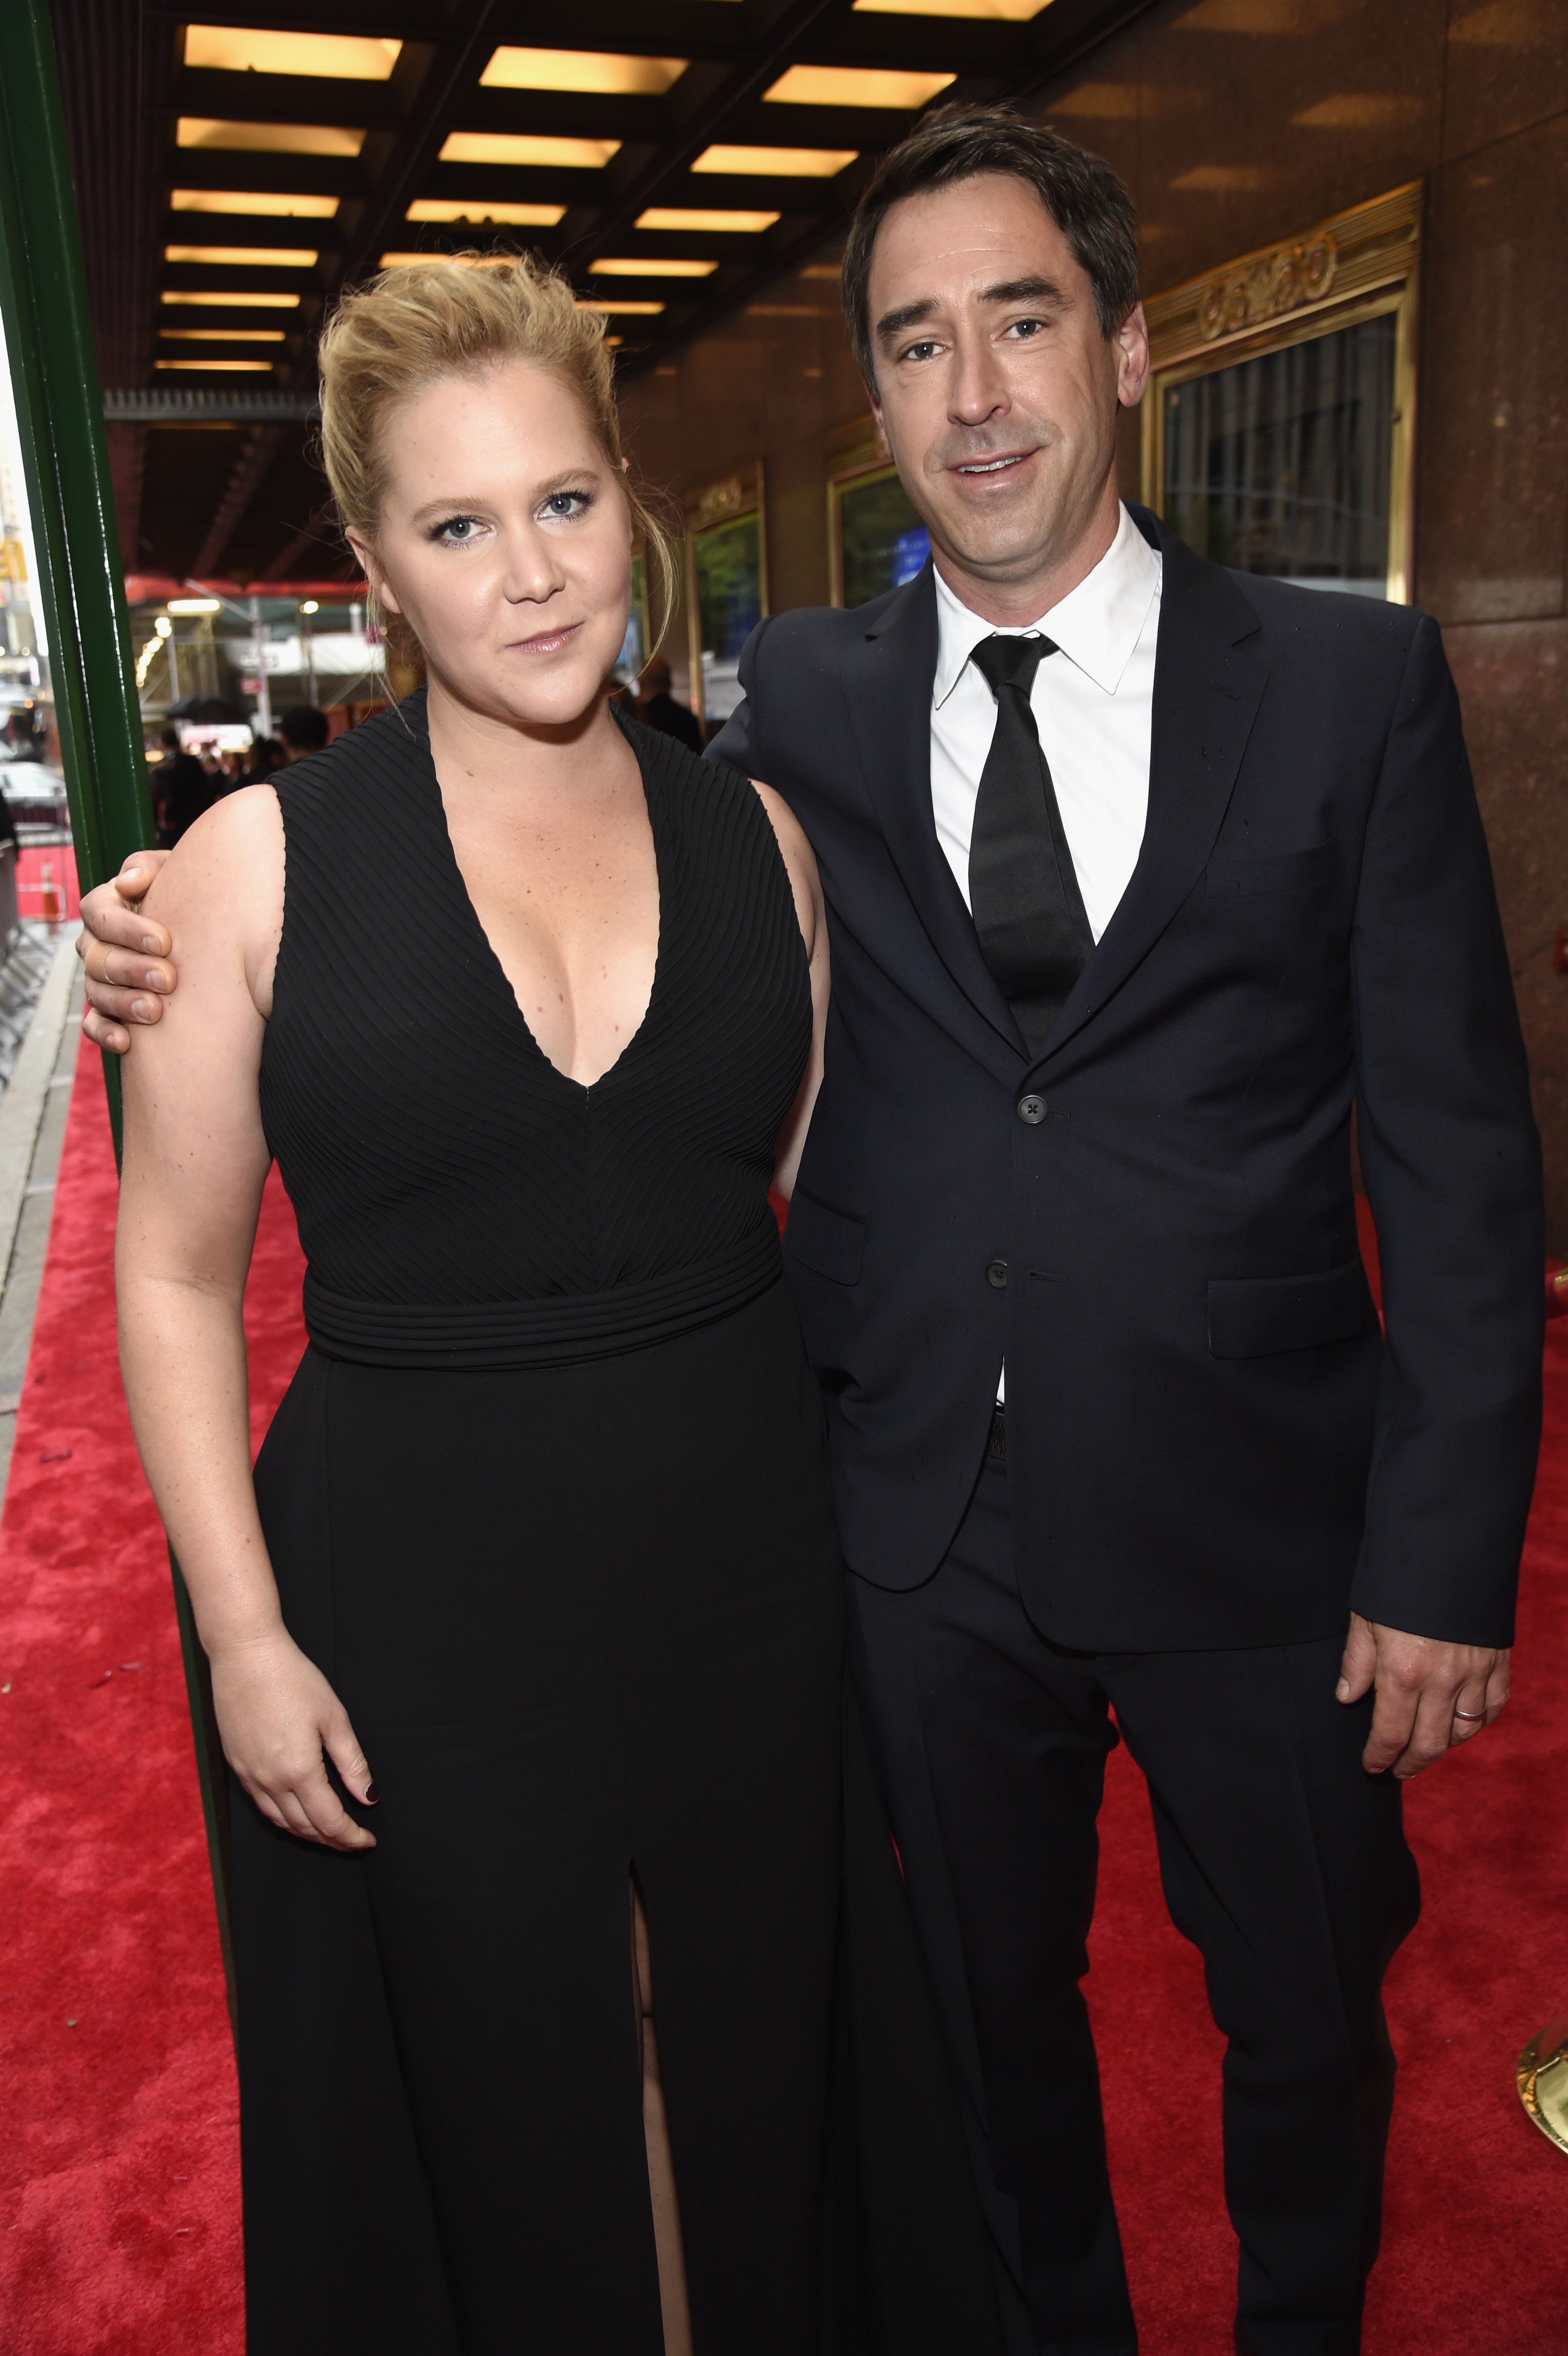 Amy Schumer and Chris Fischer attend the 72nd Annual Tony Awards. | Source: Getty Images